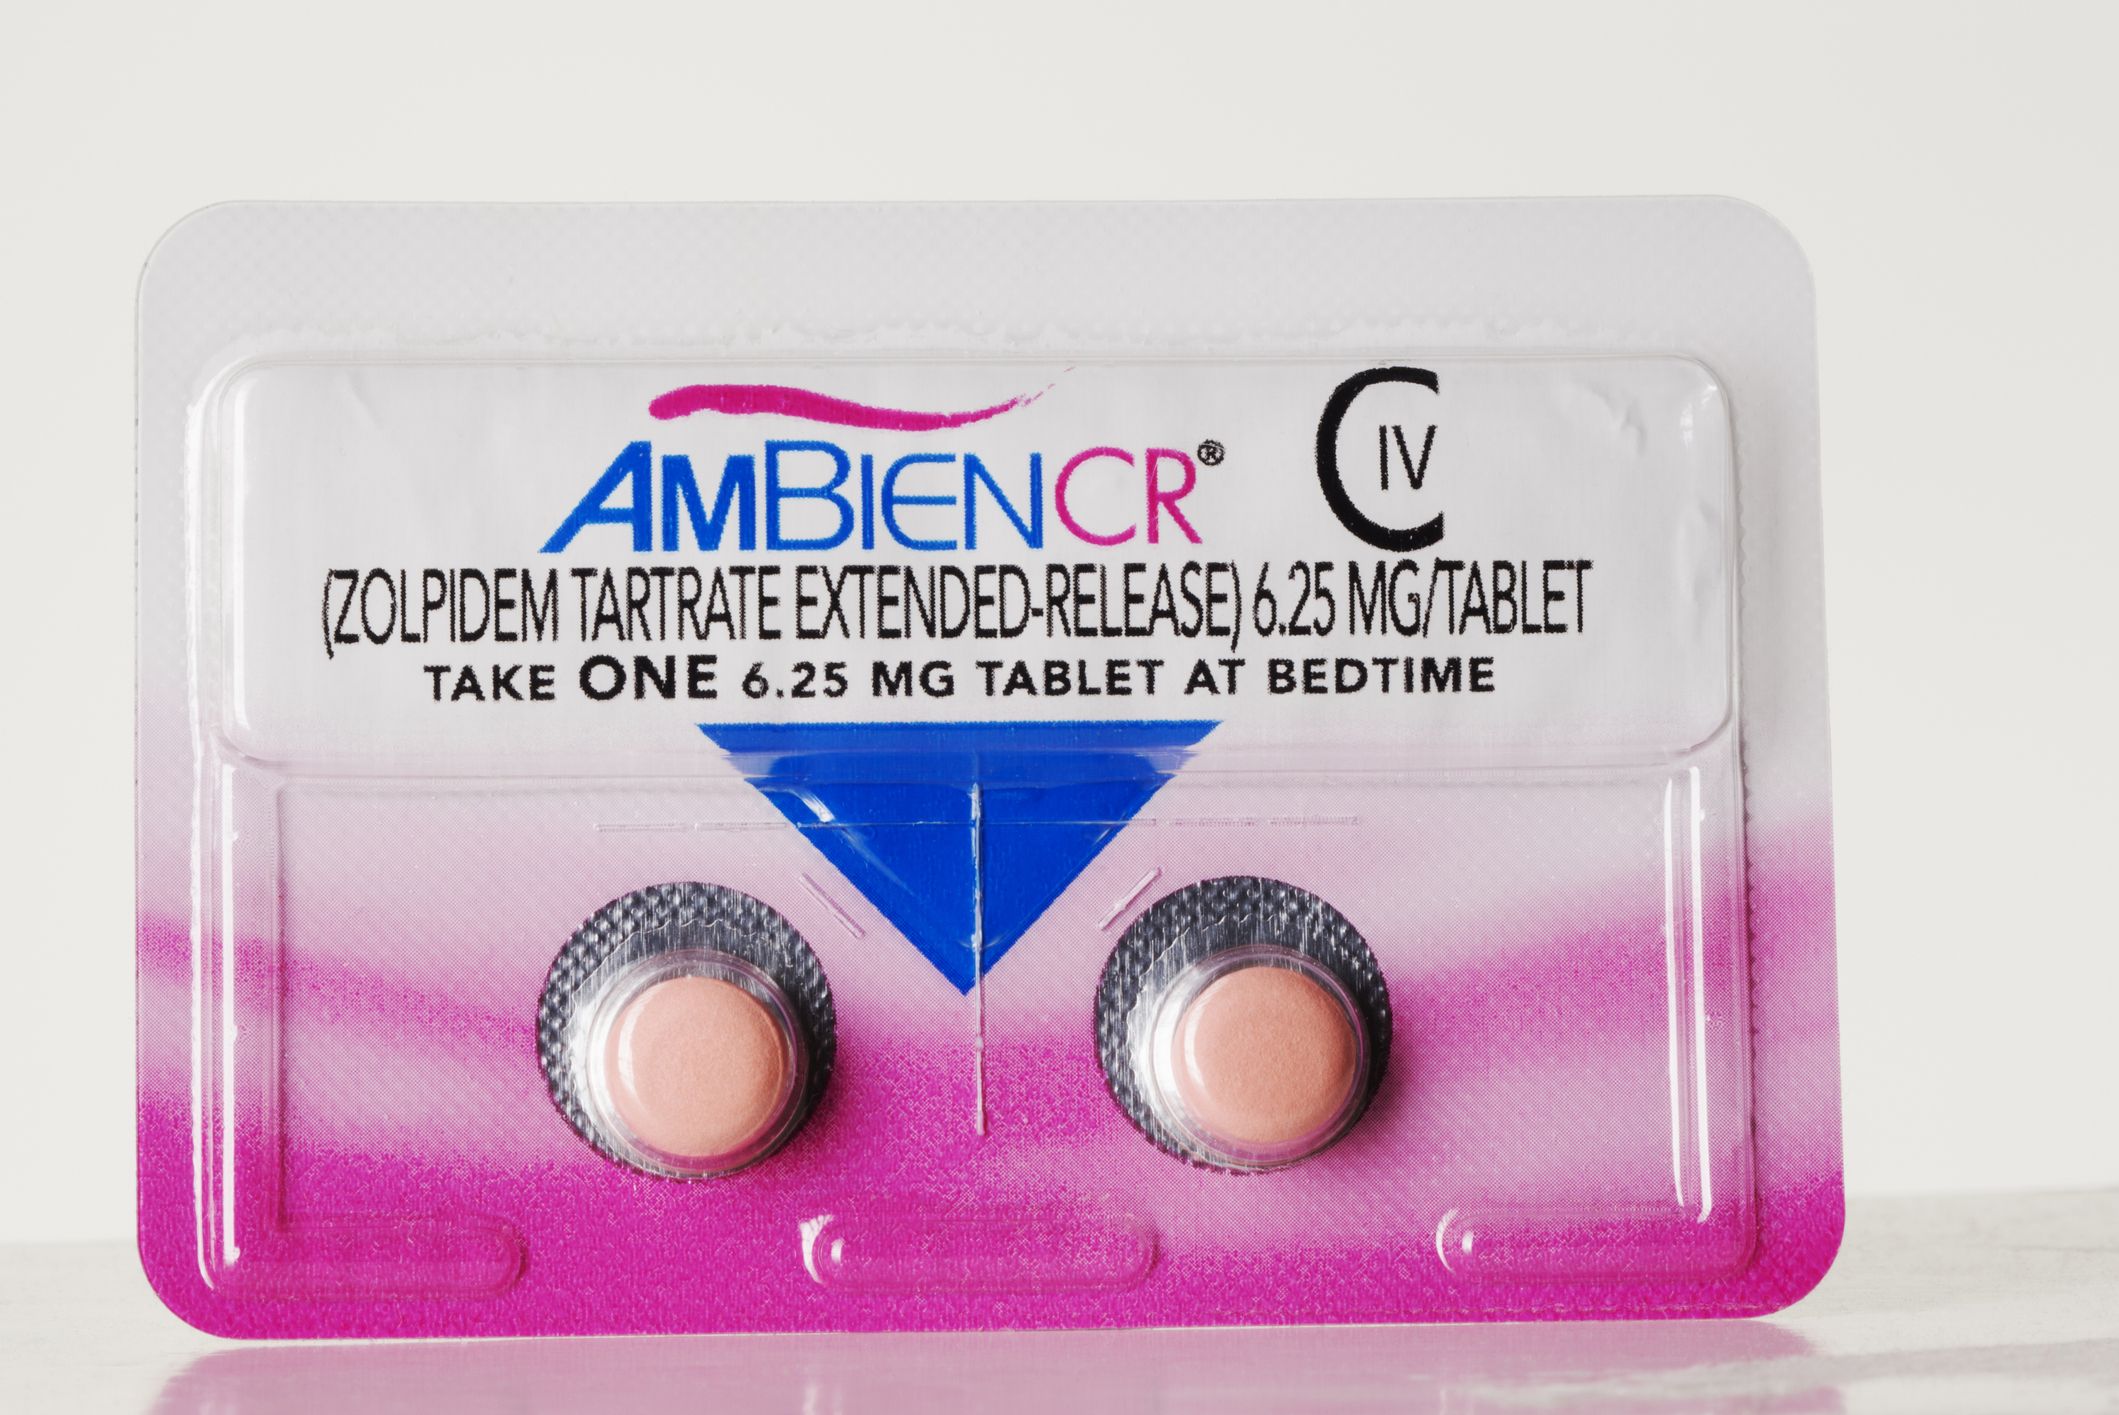 Can Ambien Cr Cause Constipation